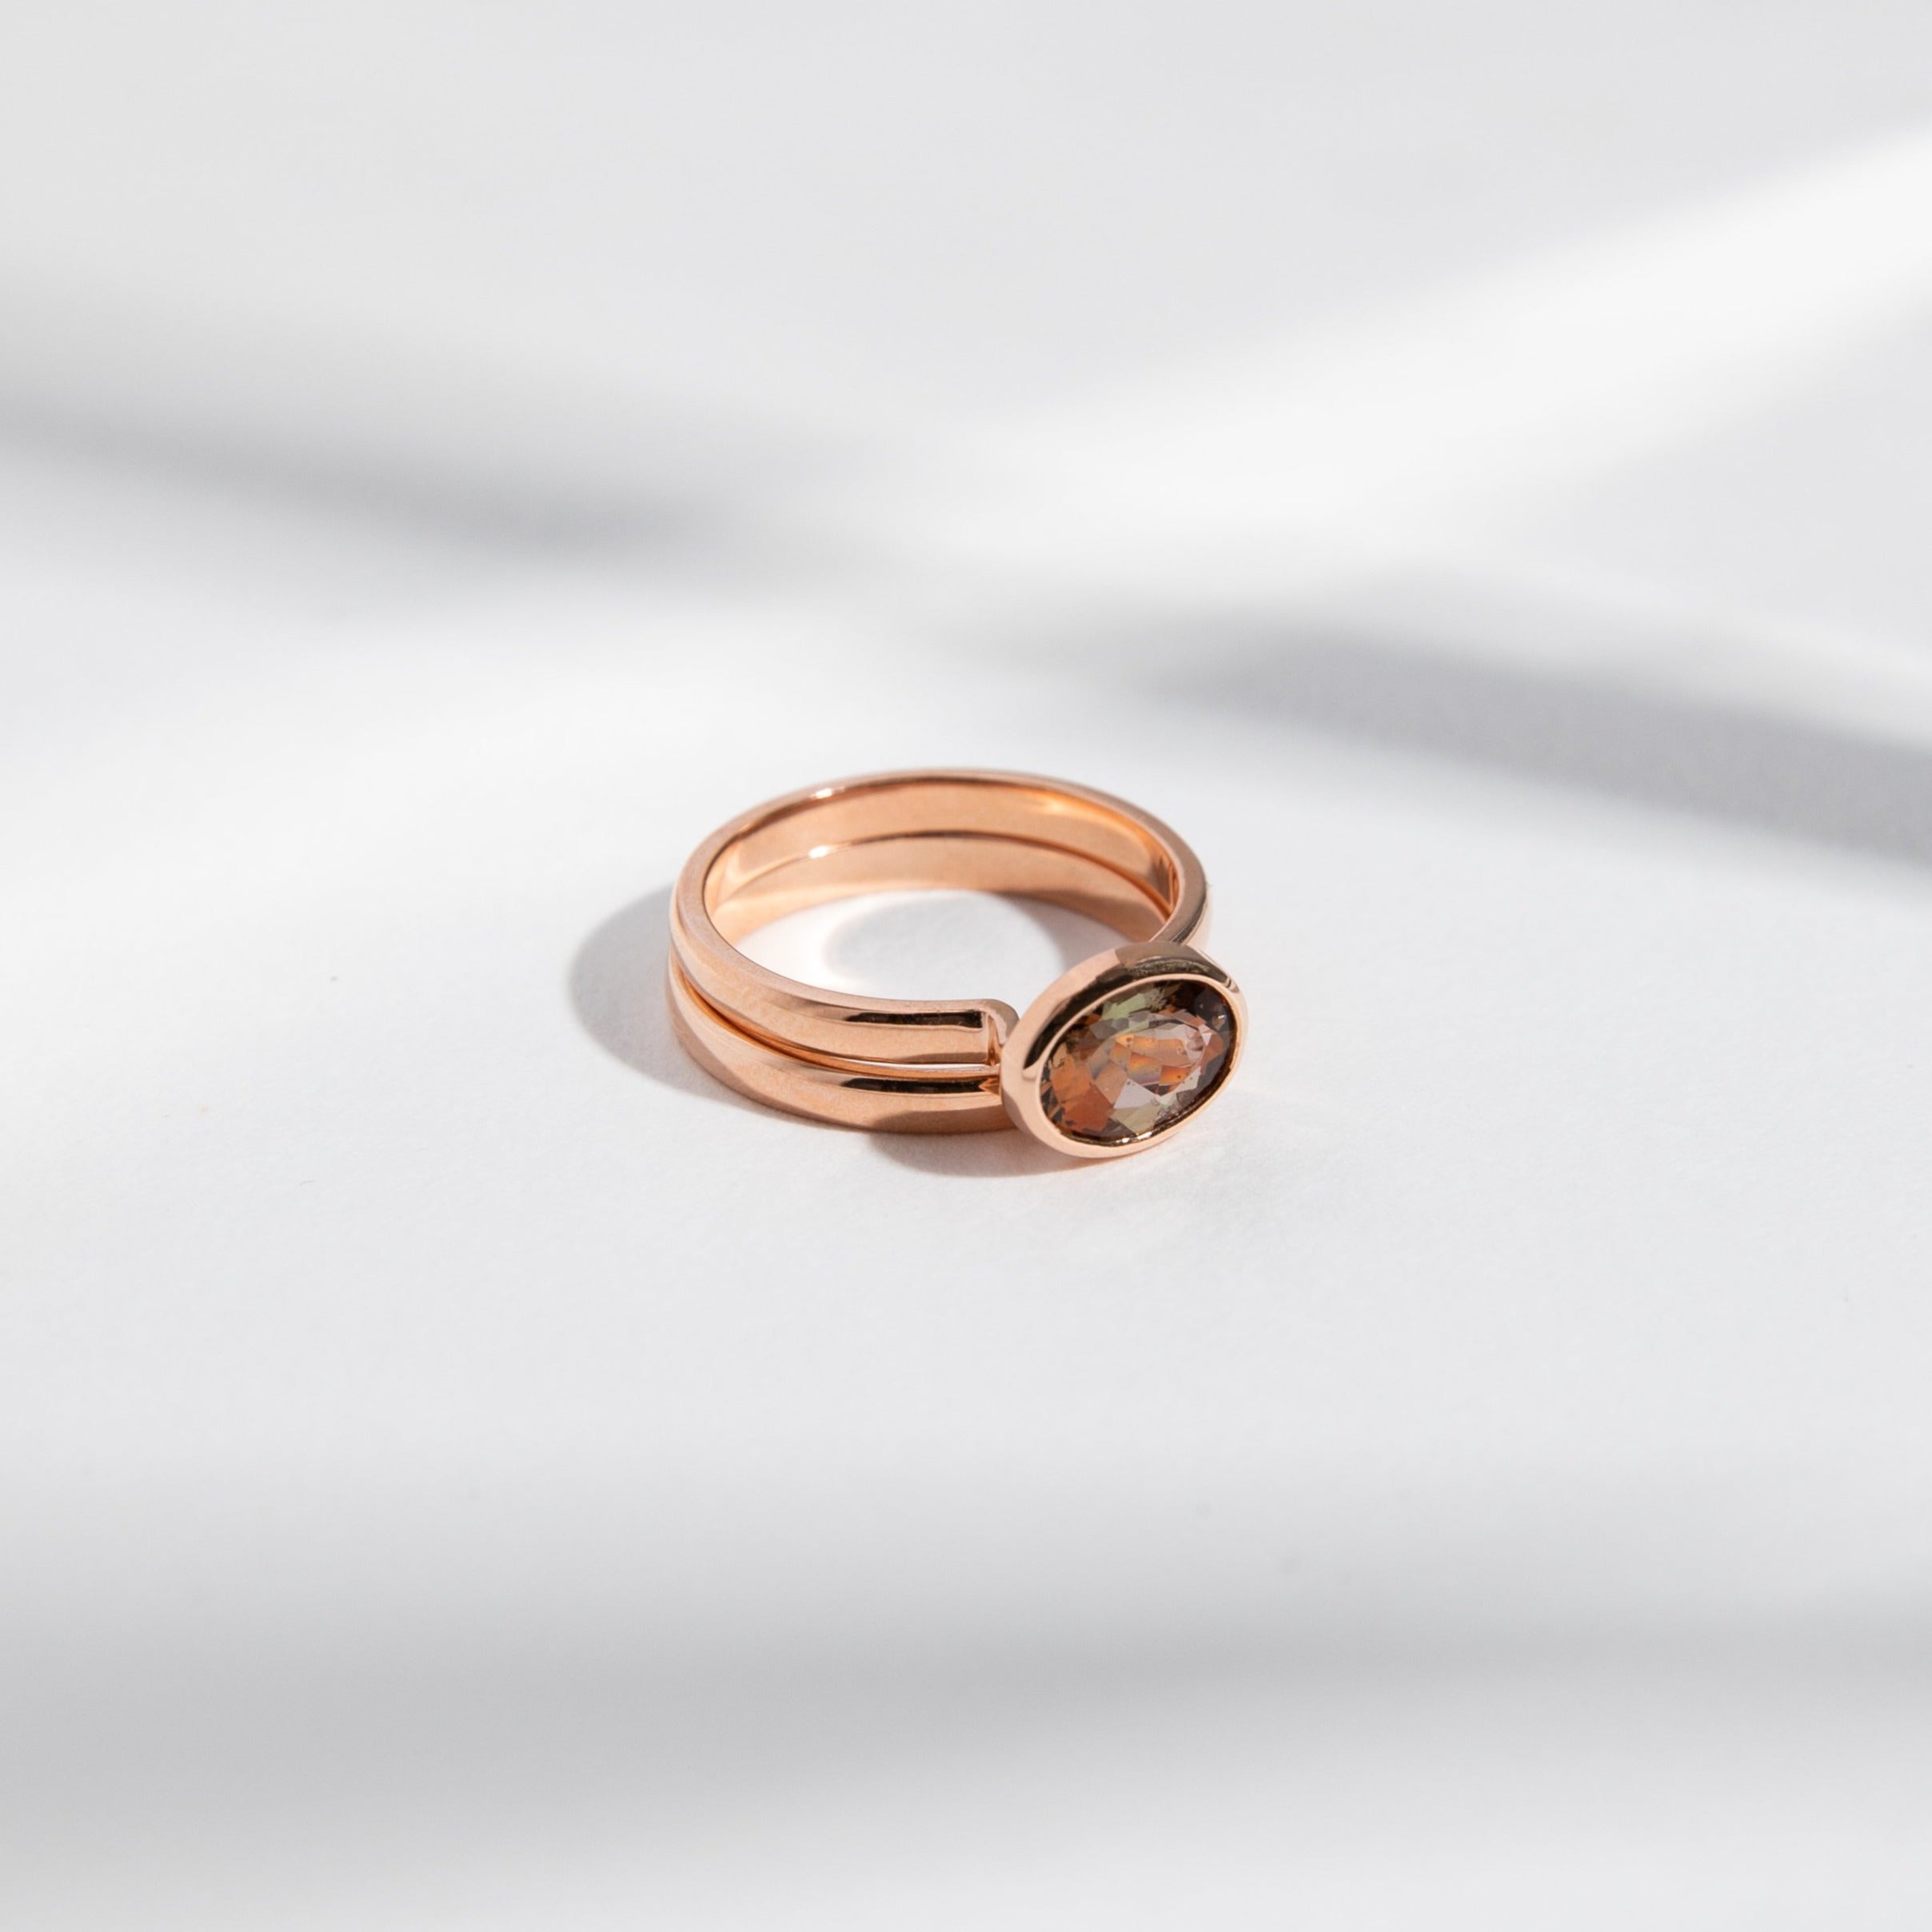 Syd Minimalist Ring in 14k Gold set with a 1.2ct oval cut andalusite By SHW Fine Jewelry NYC